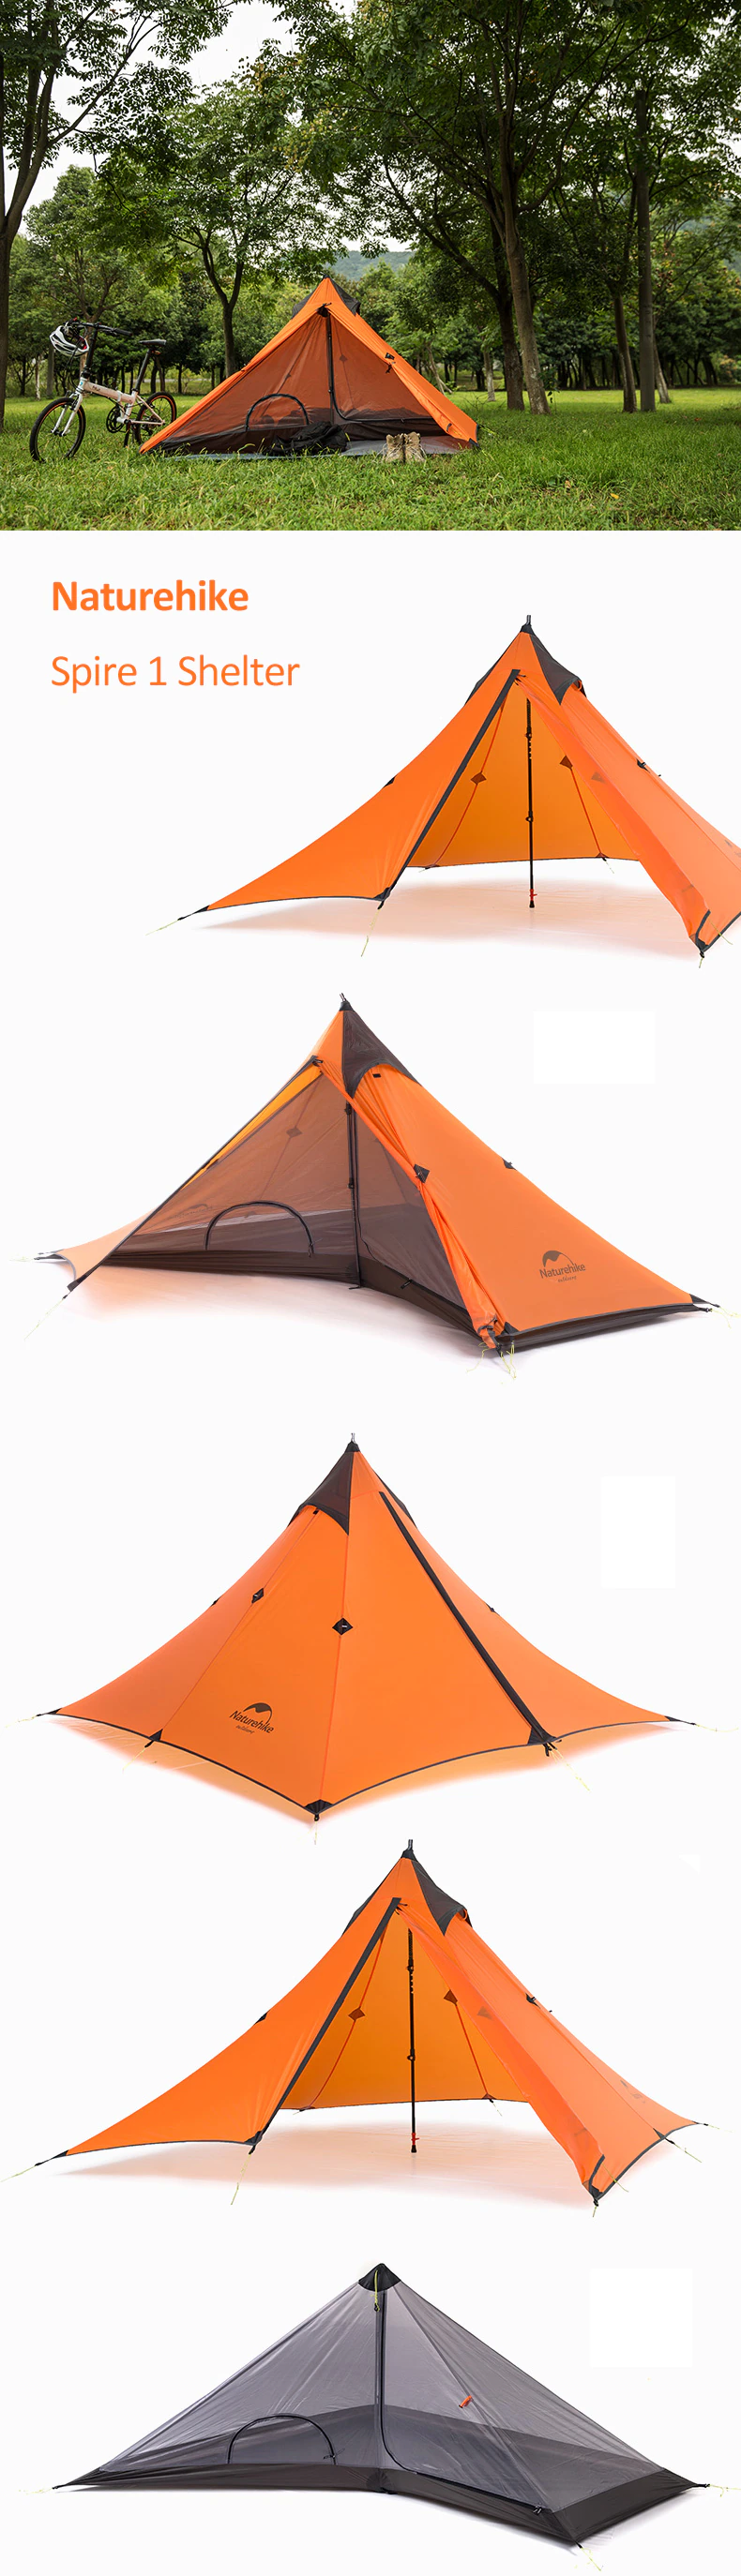 Cheap Goat Tents 1 Ultralight Tent Tents Sports Shelter 1 Person Tent Camping Tents